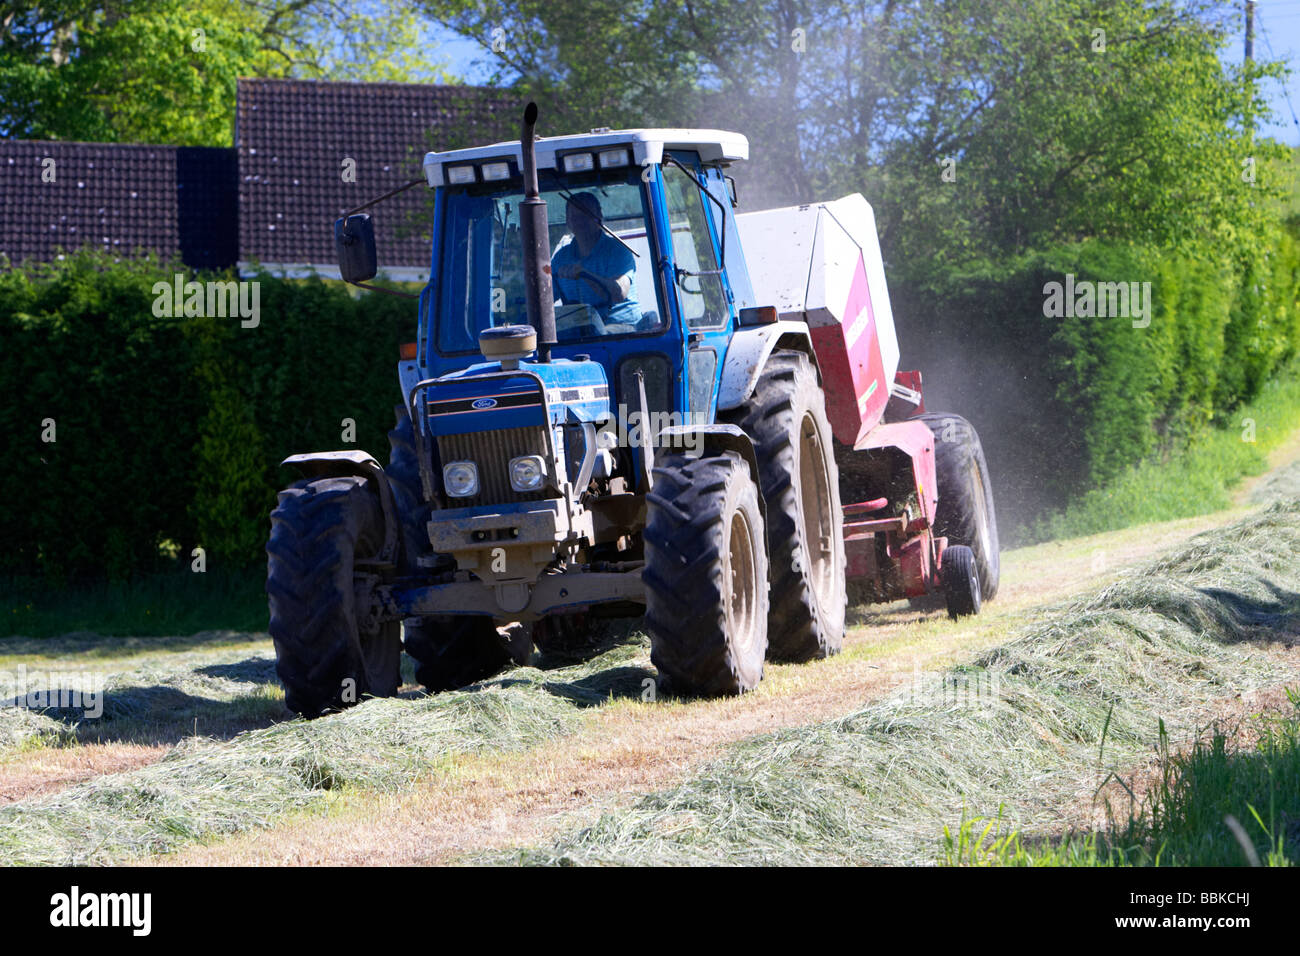 tractor towing baler collects grass cut for silage production county down northern ireland uk Stock Photo